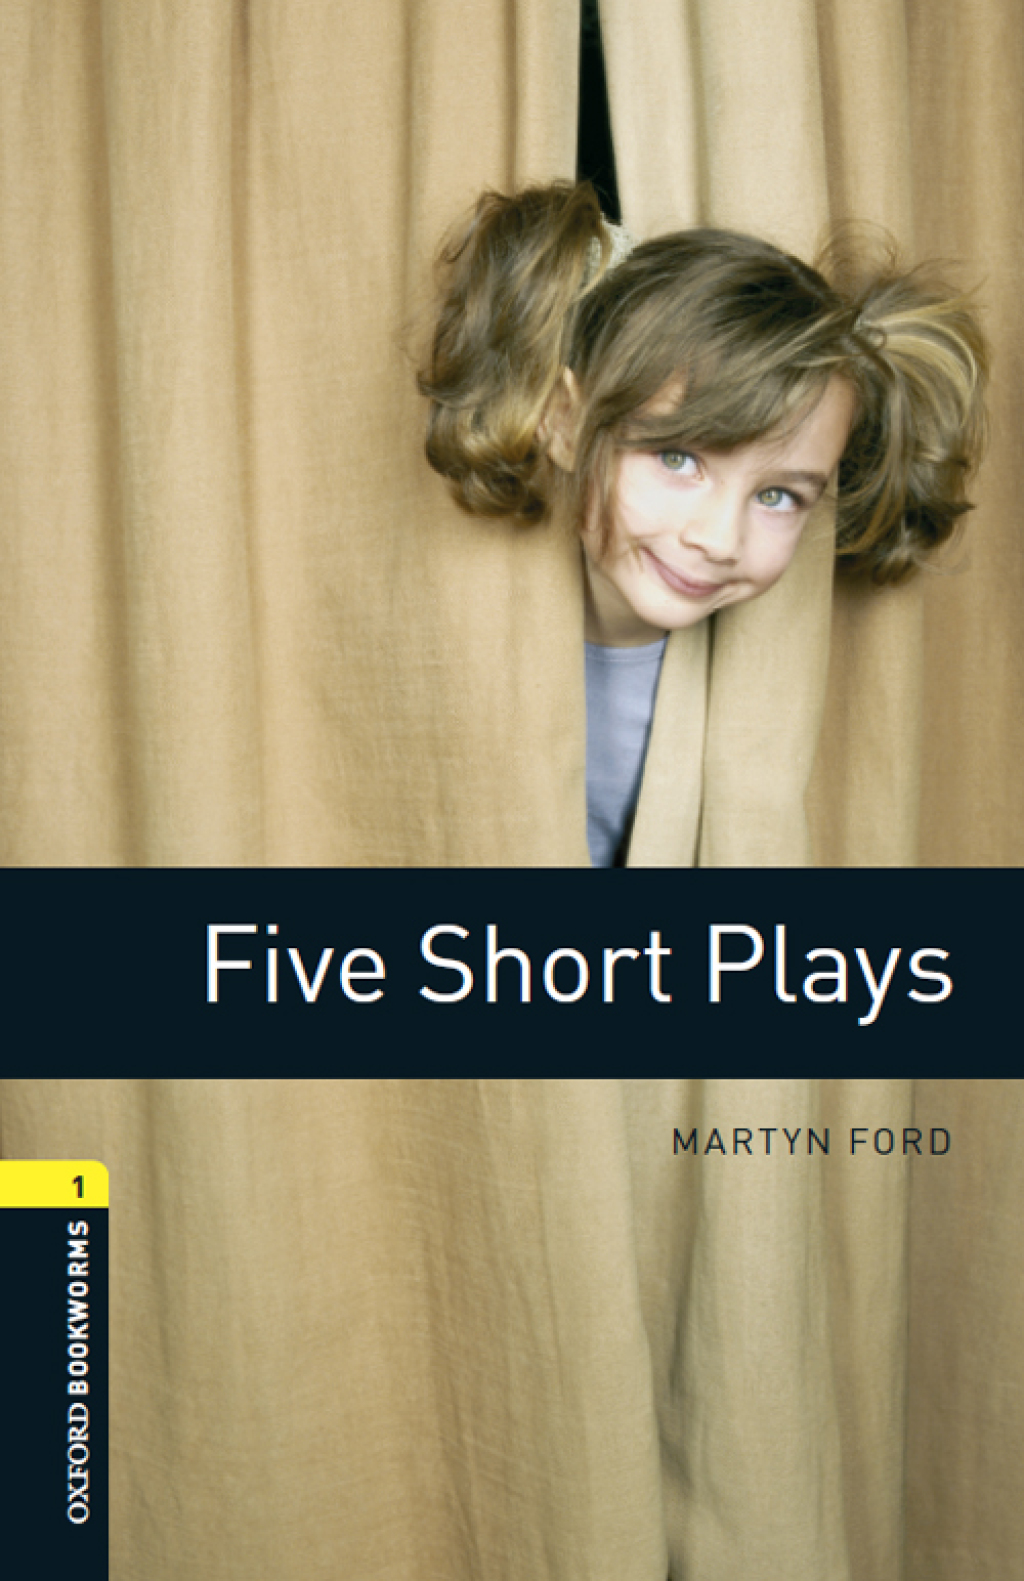 Five Short Plays Level 1 Oxford Bookworms Library - 3rd Edition (eBook Rental)